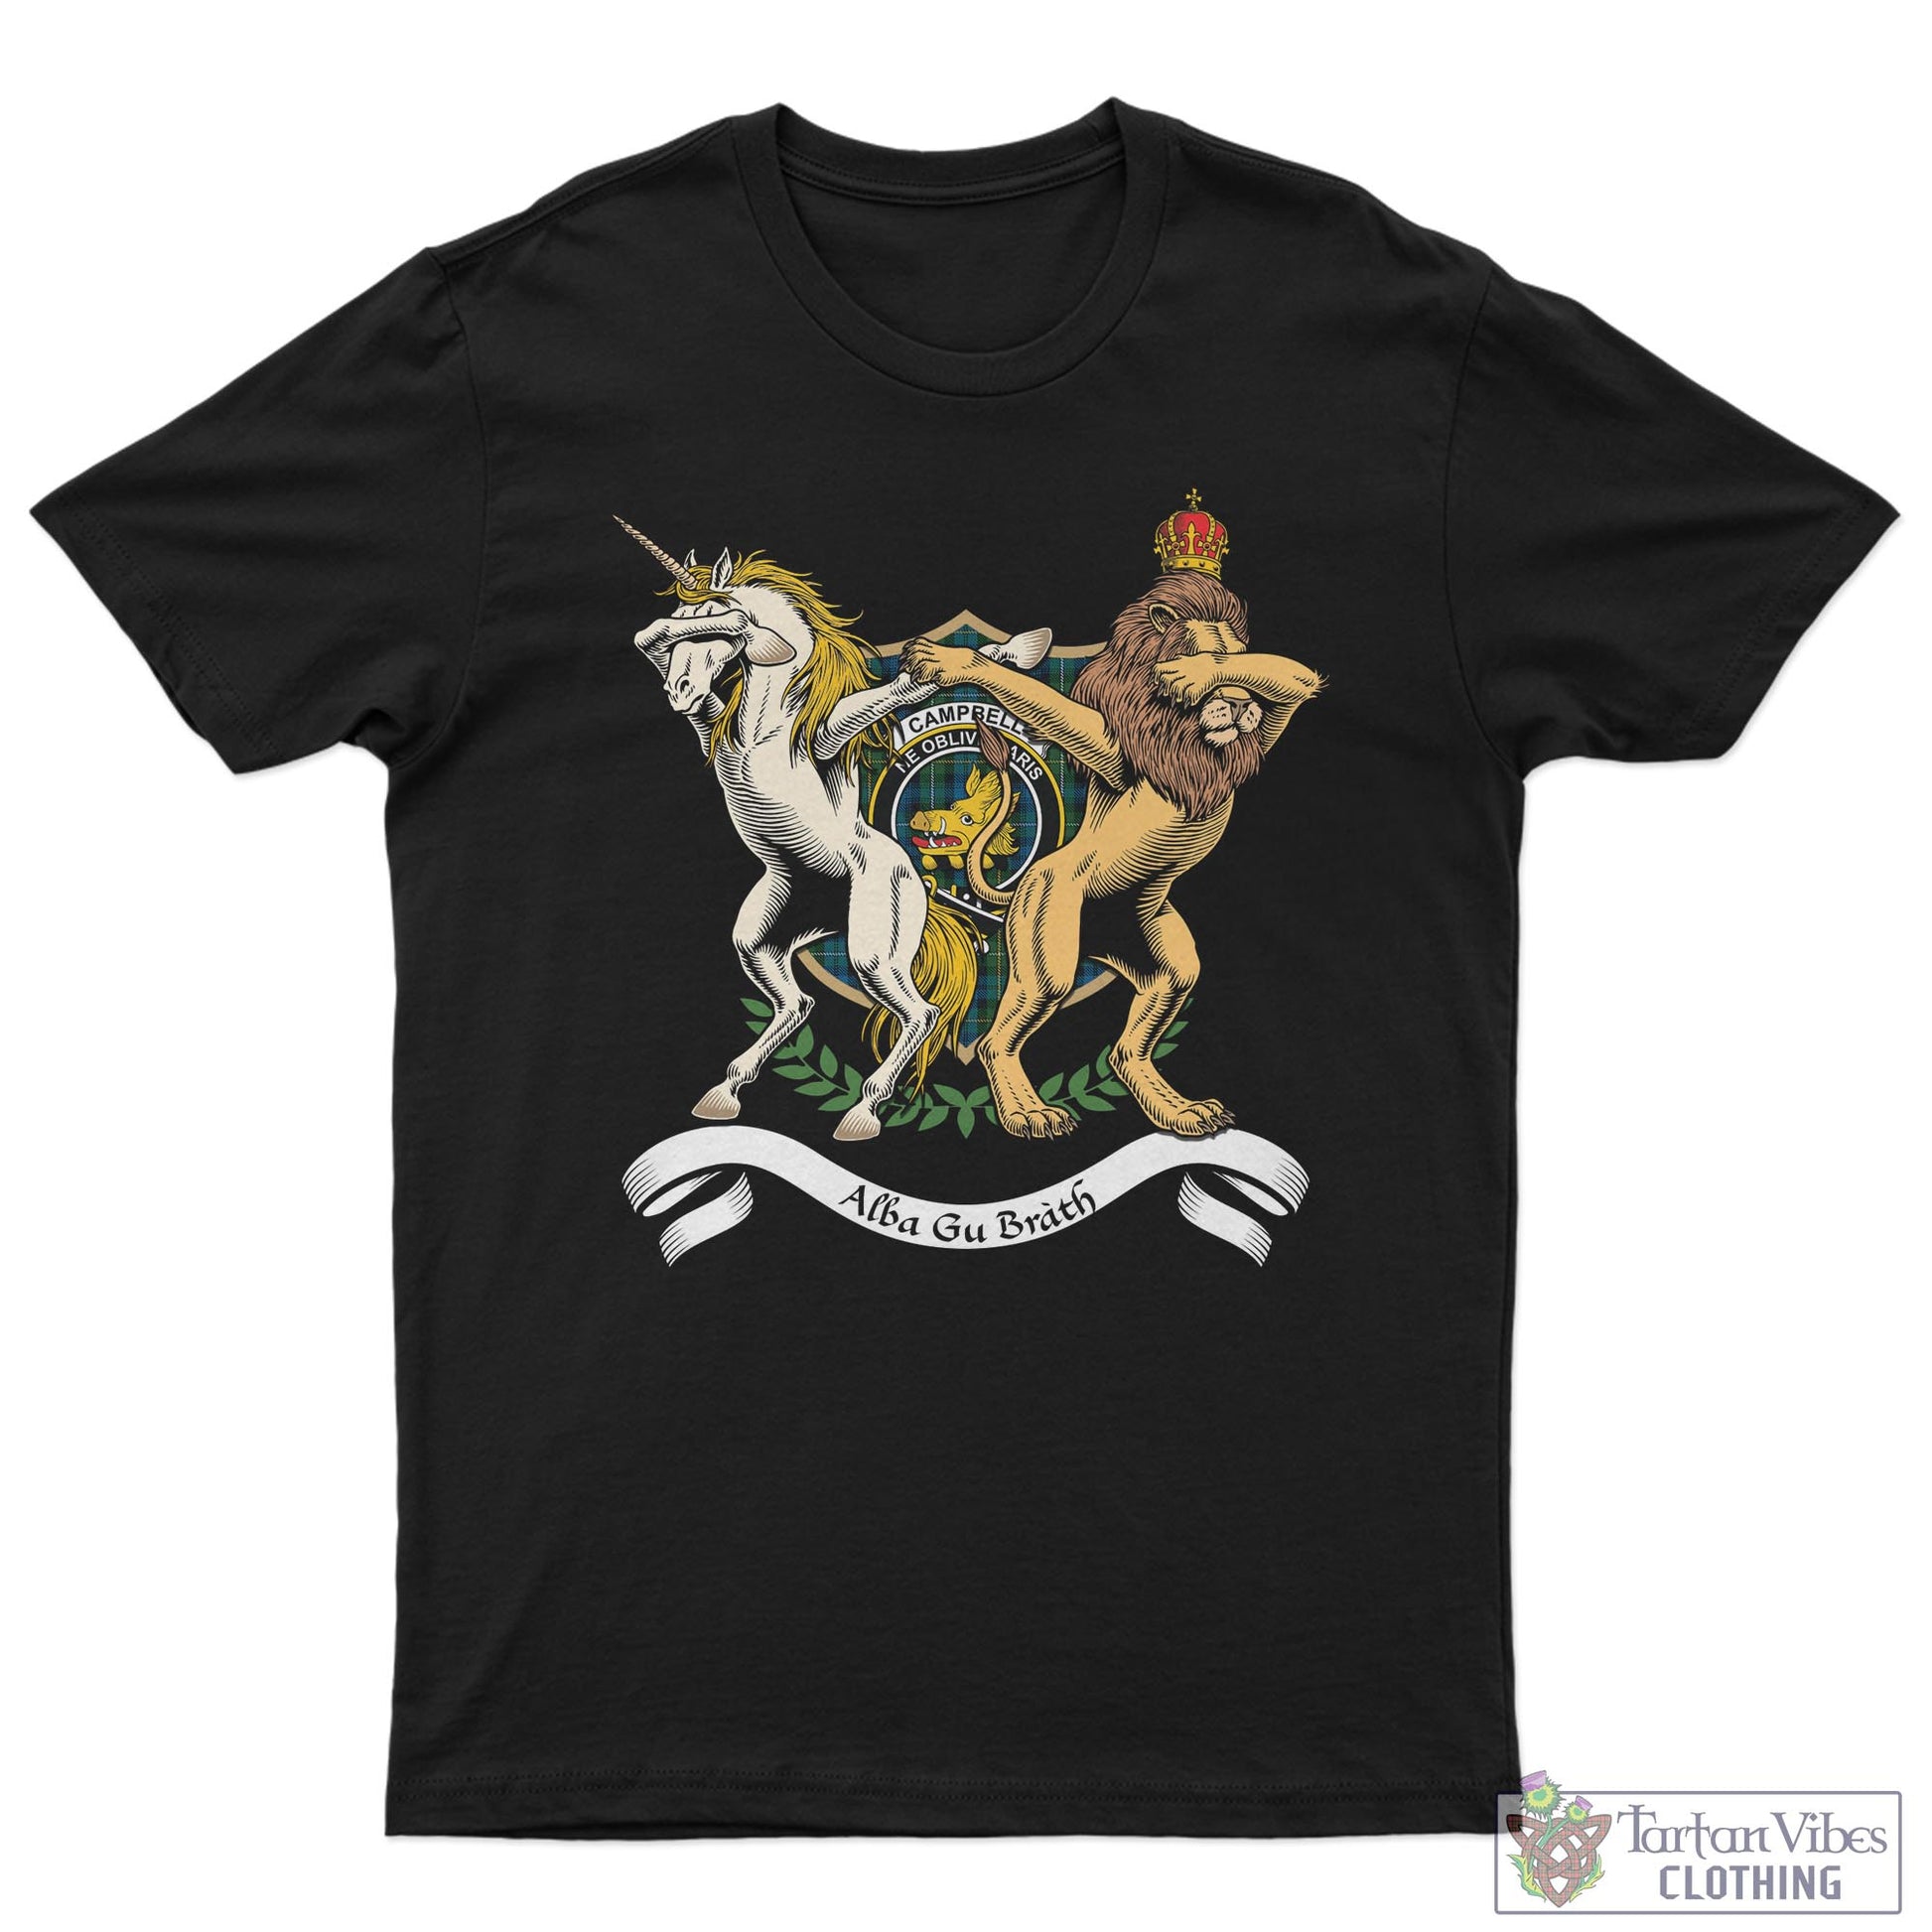 Tartan Vibes Clothing Campbell of Argyll #02 Family Crest Cotton Men's T-Shirt with Scotland Royal Coat Of Arm Funny Style